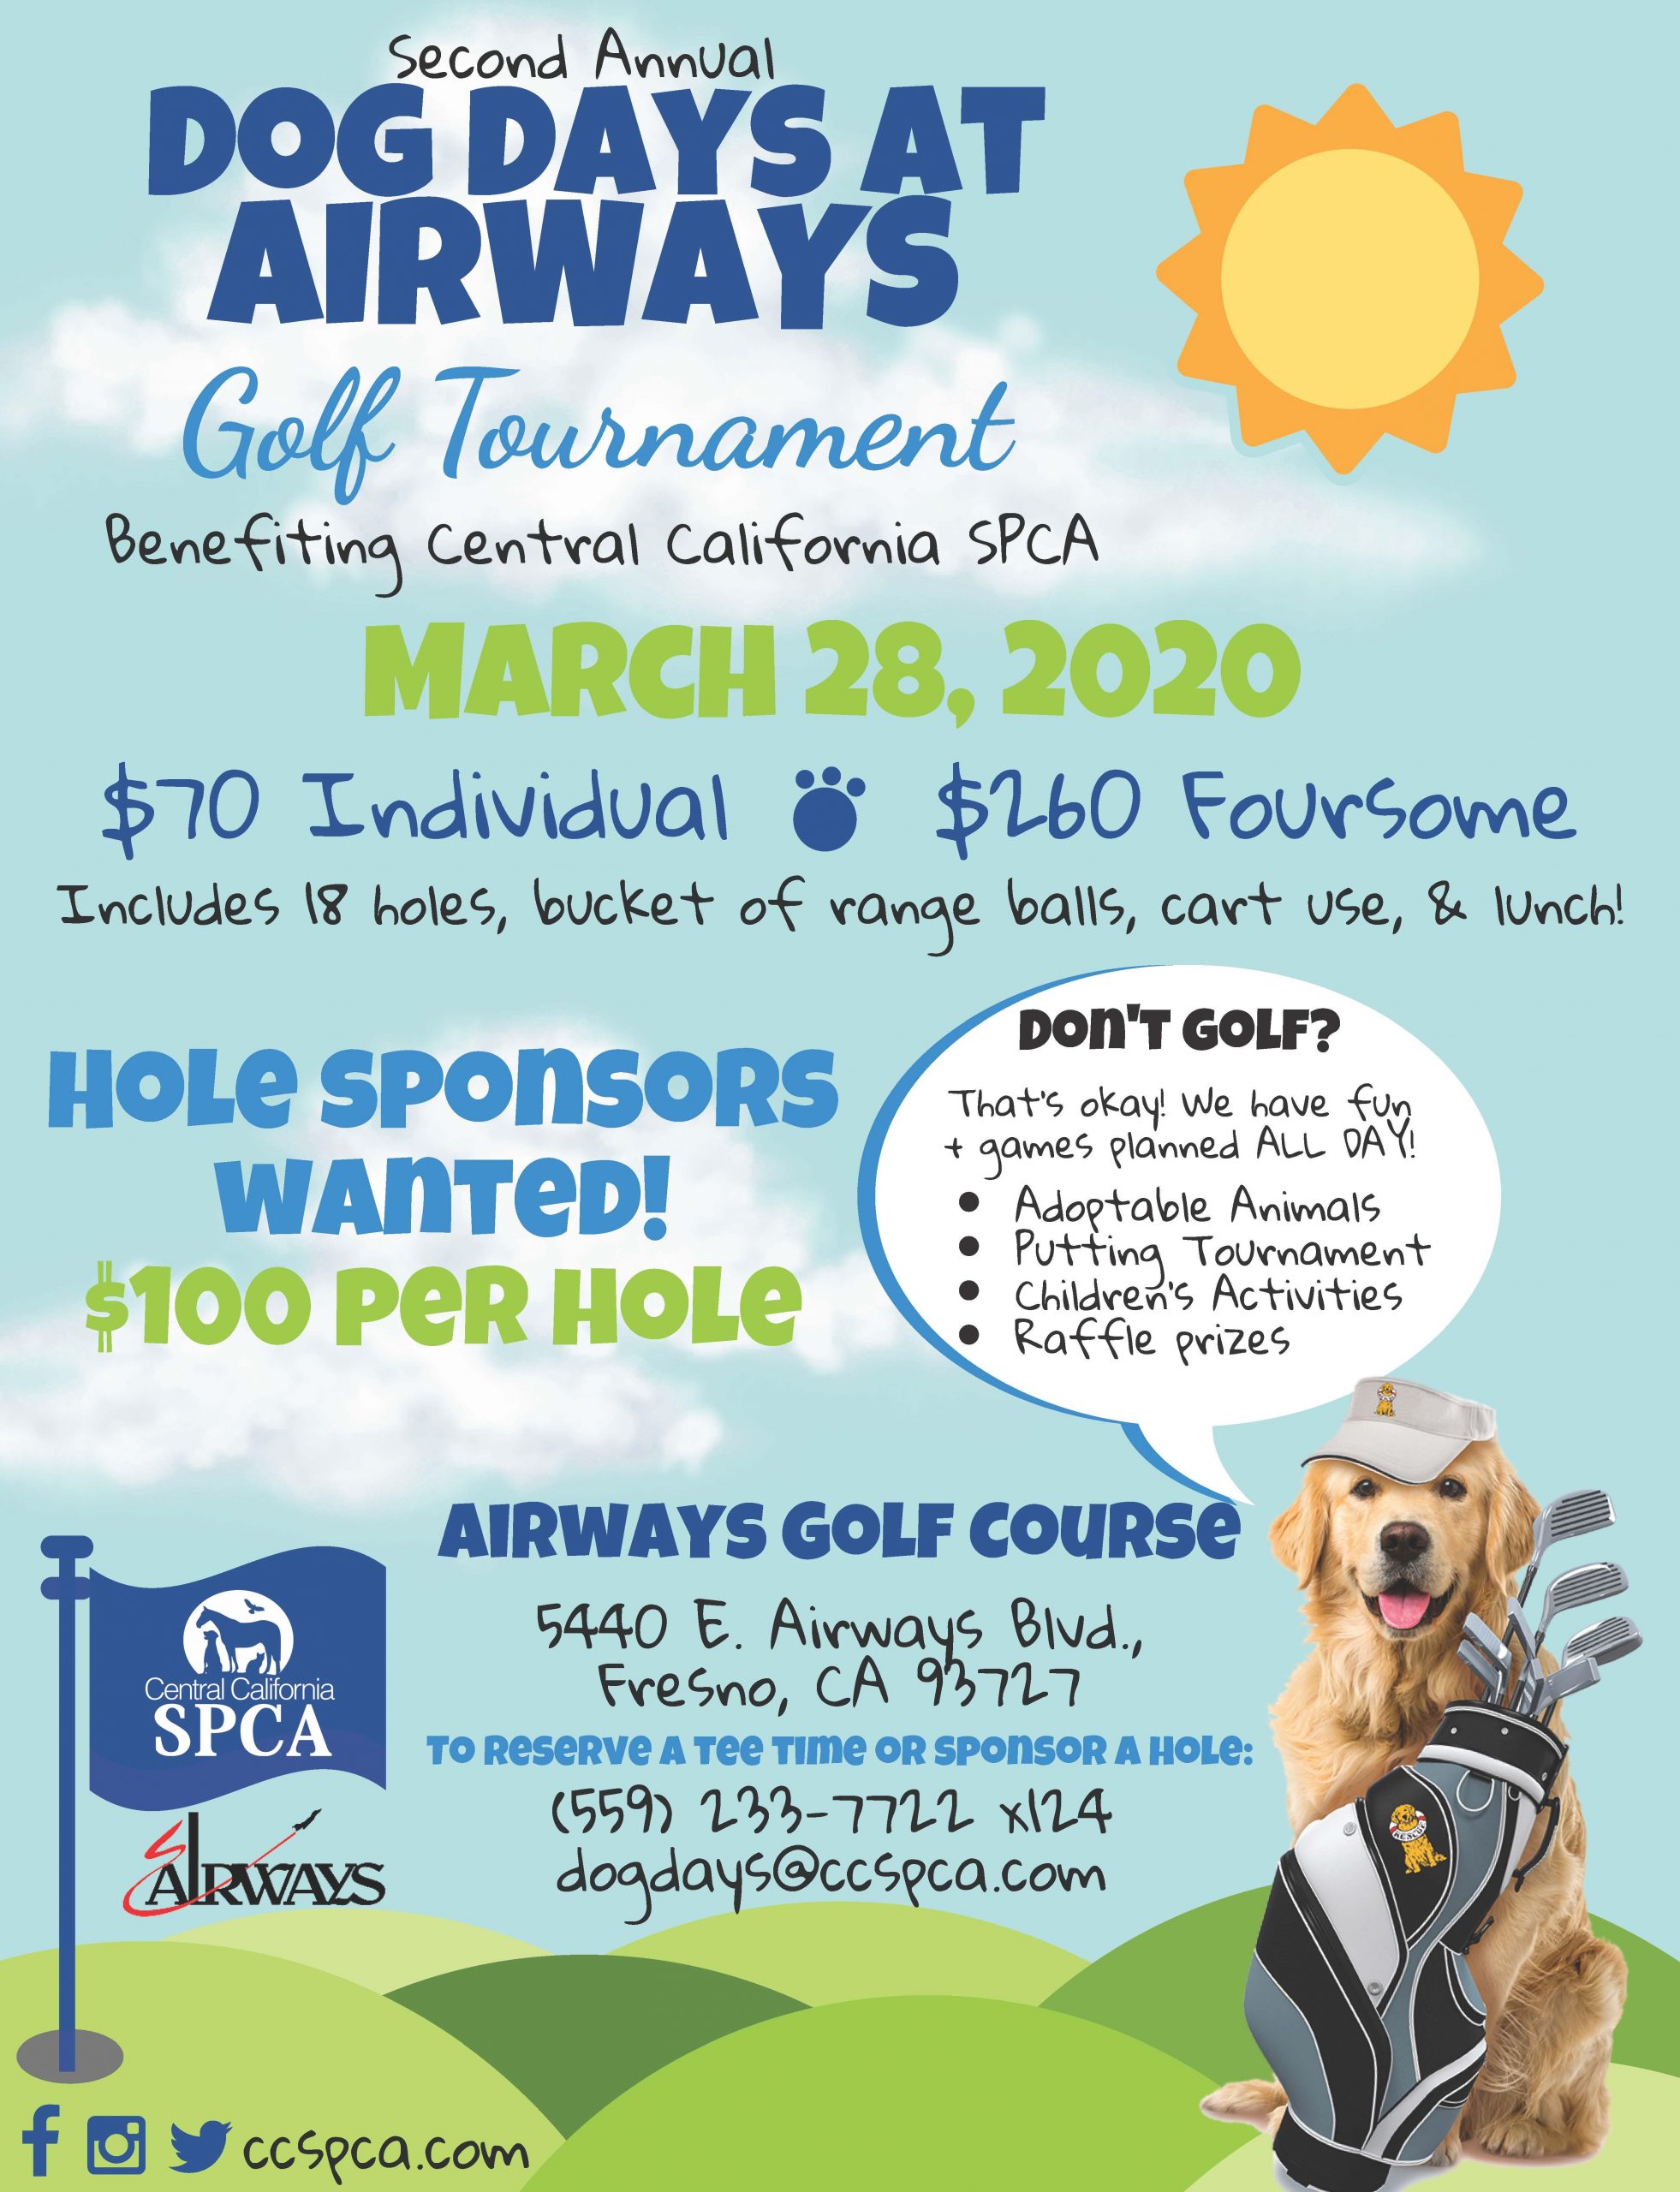 2nd Annual Dog Days @ Airways Golf Tournament and Family Fun Day